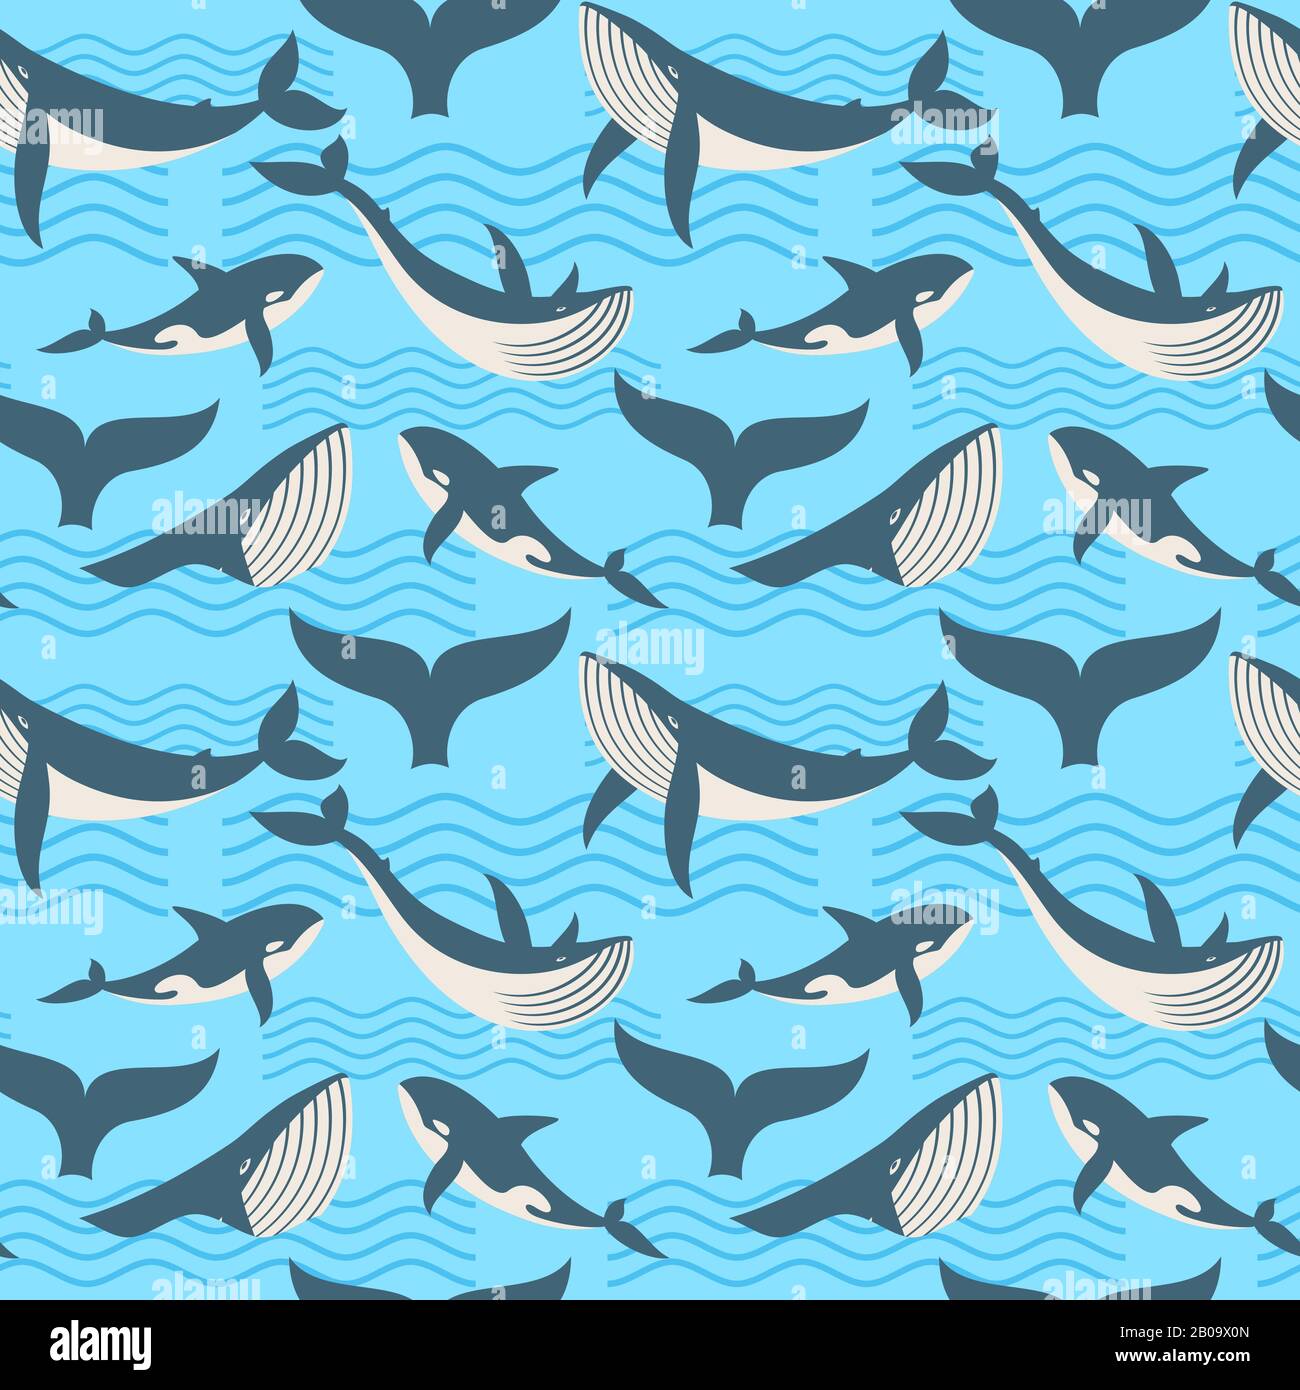 Vector seamless pattern with whale in ocean waves. Seamless background with wild whale, illustration of giant killer whale Stock Vector